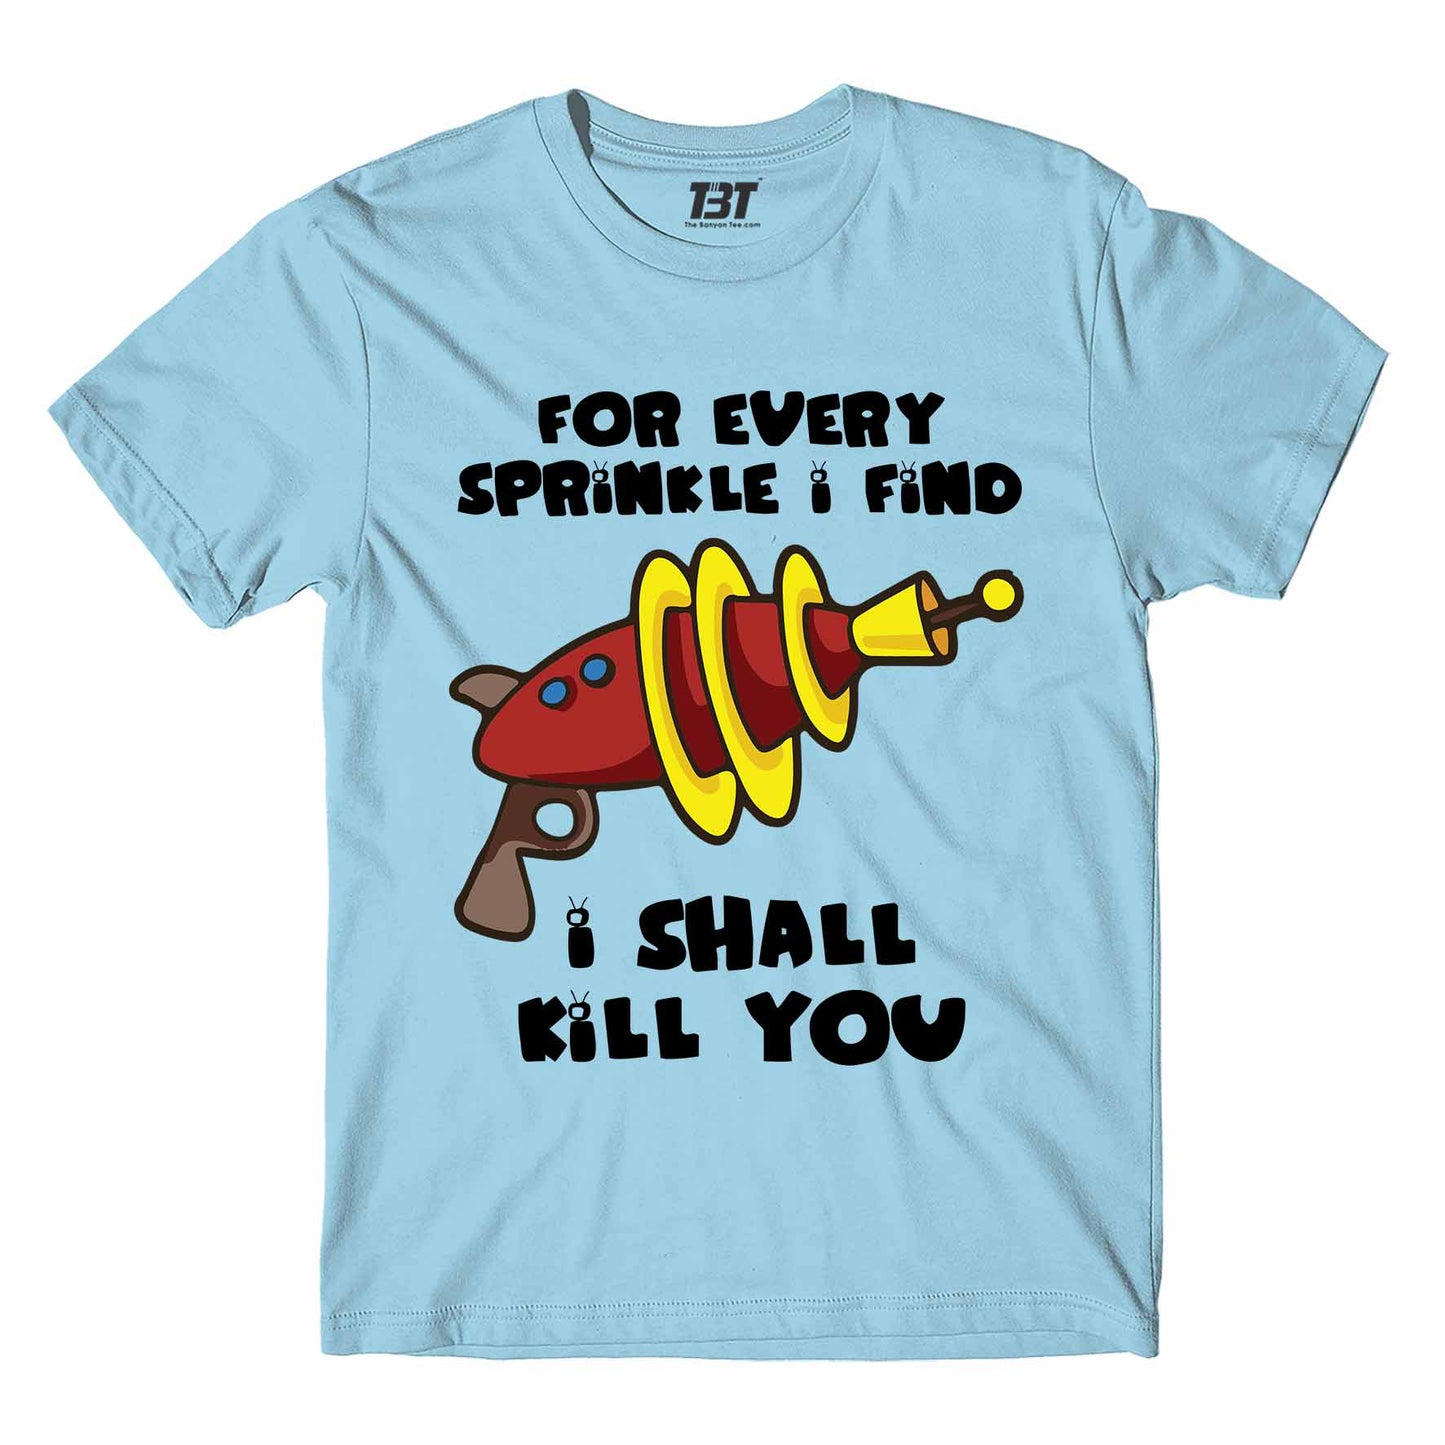 family guy i shall kill you t-shirt tv & movies buy online united states usa the banyan tee tbt men women girls boys unisex Sky Blue - stewie griffin dialogue